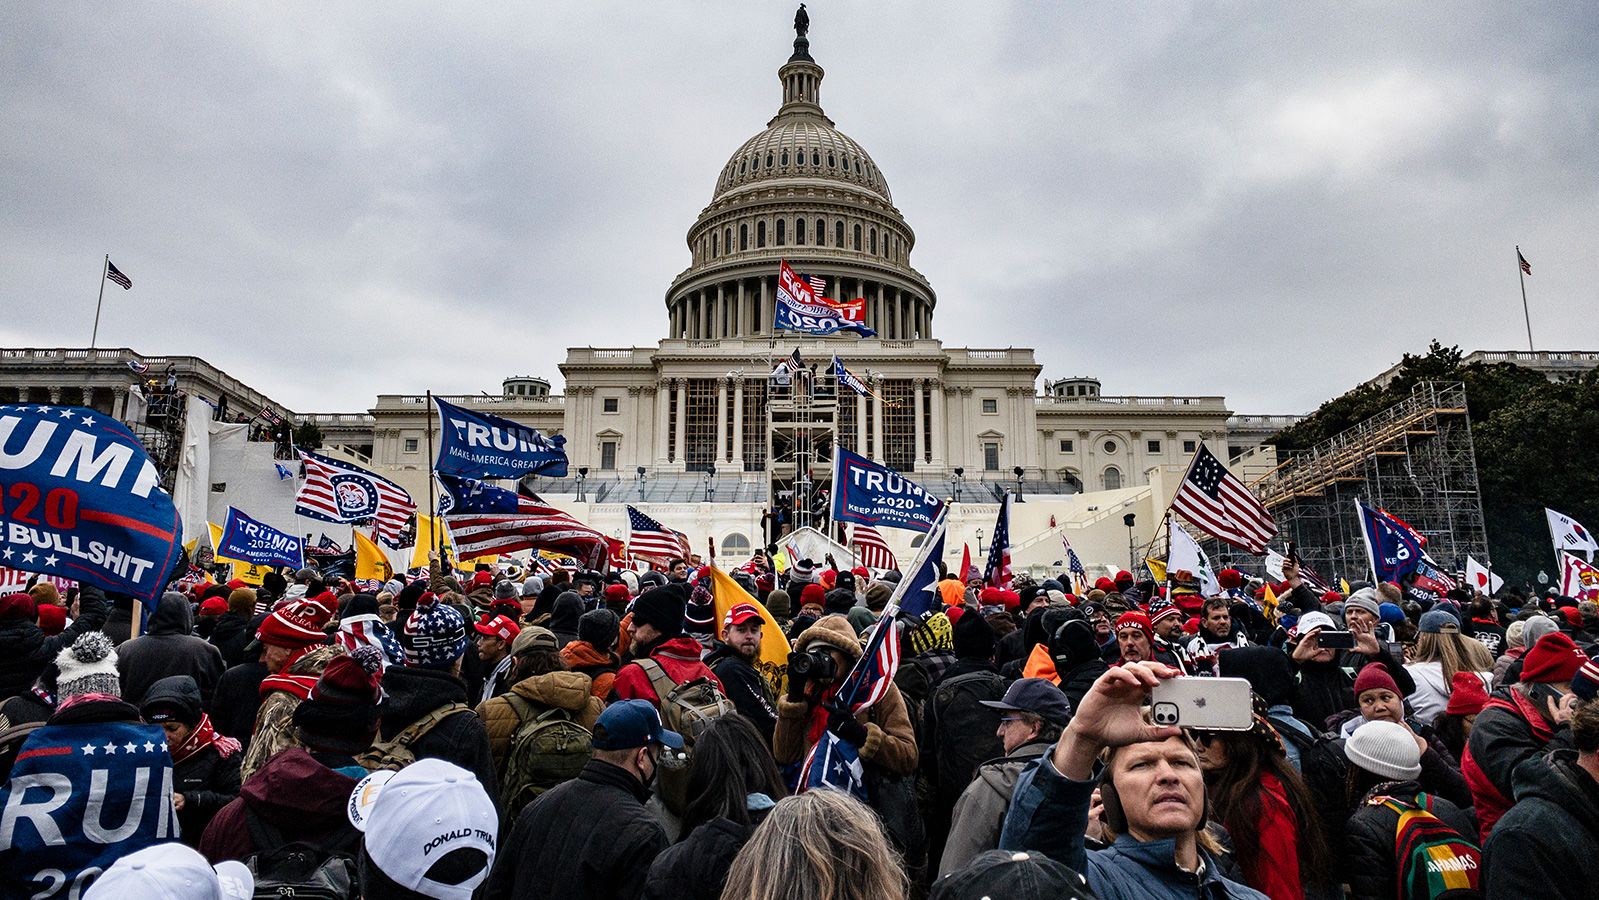 Pro-Trump supporters storm the US Capitol following a rally with President Donald Trump on January 6, 2021, in Washington, DC.